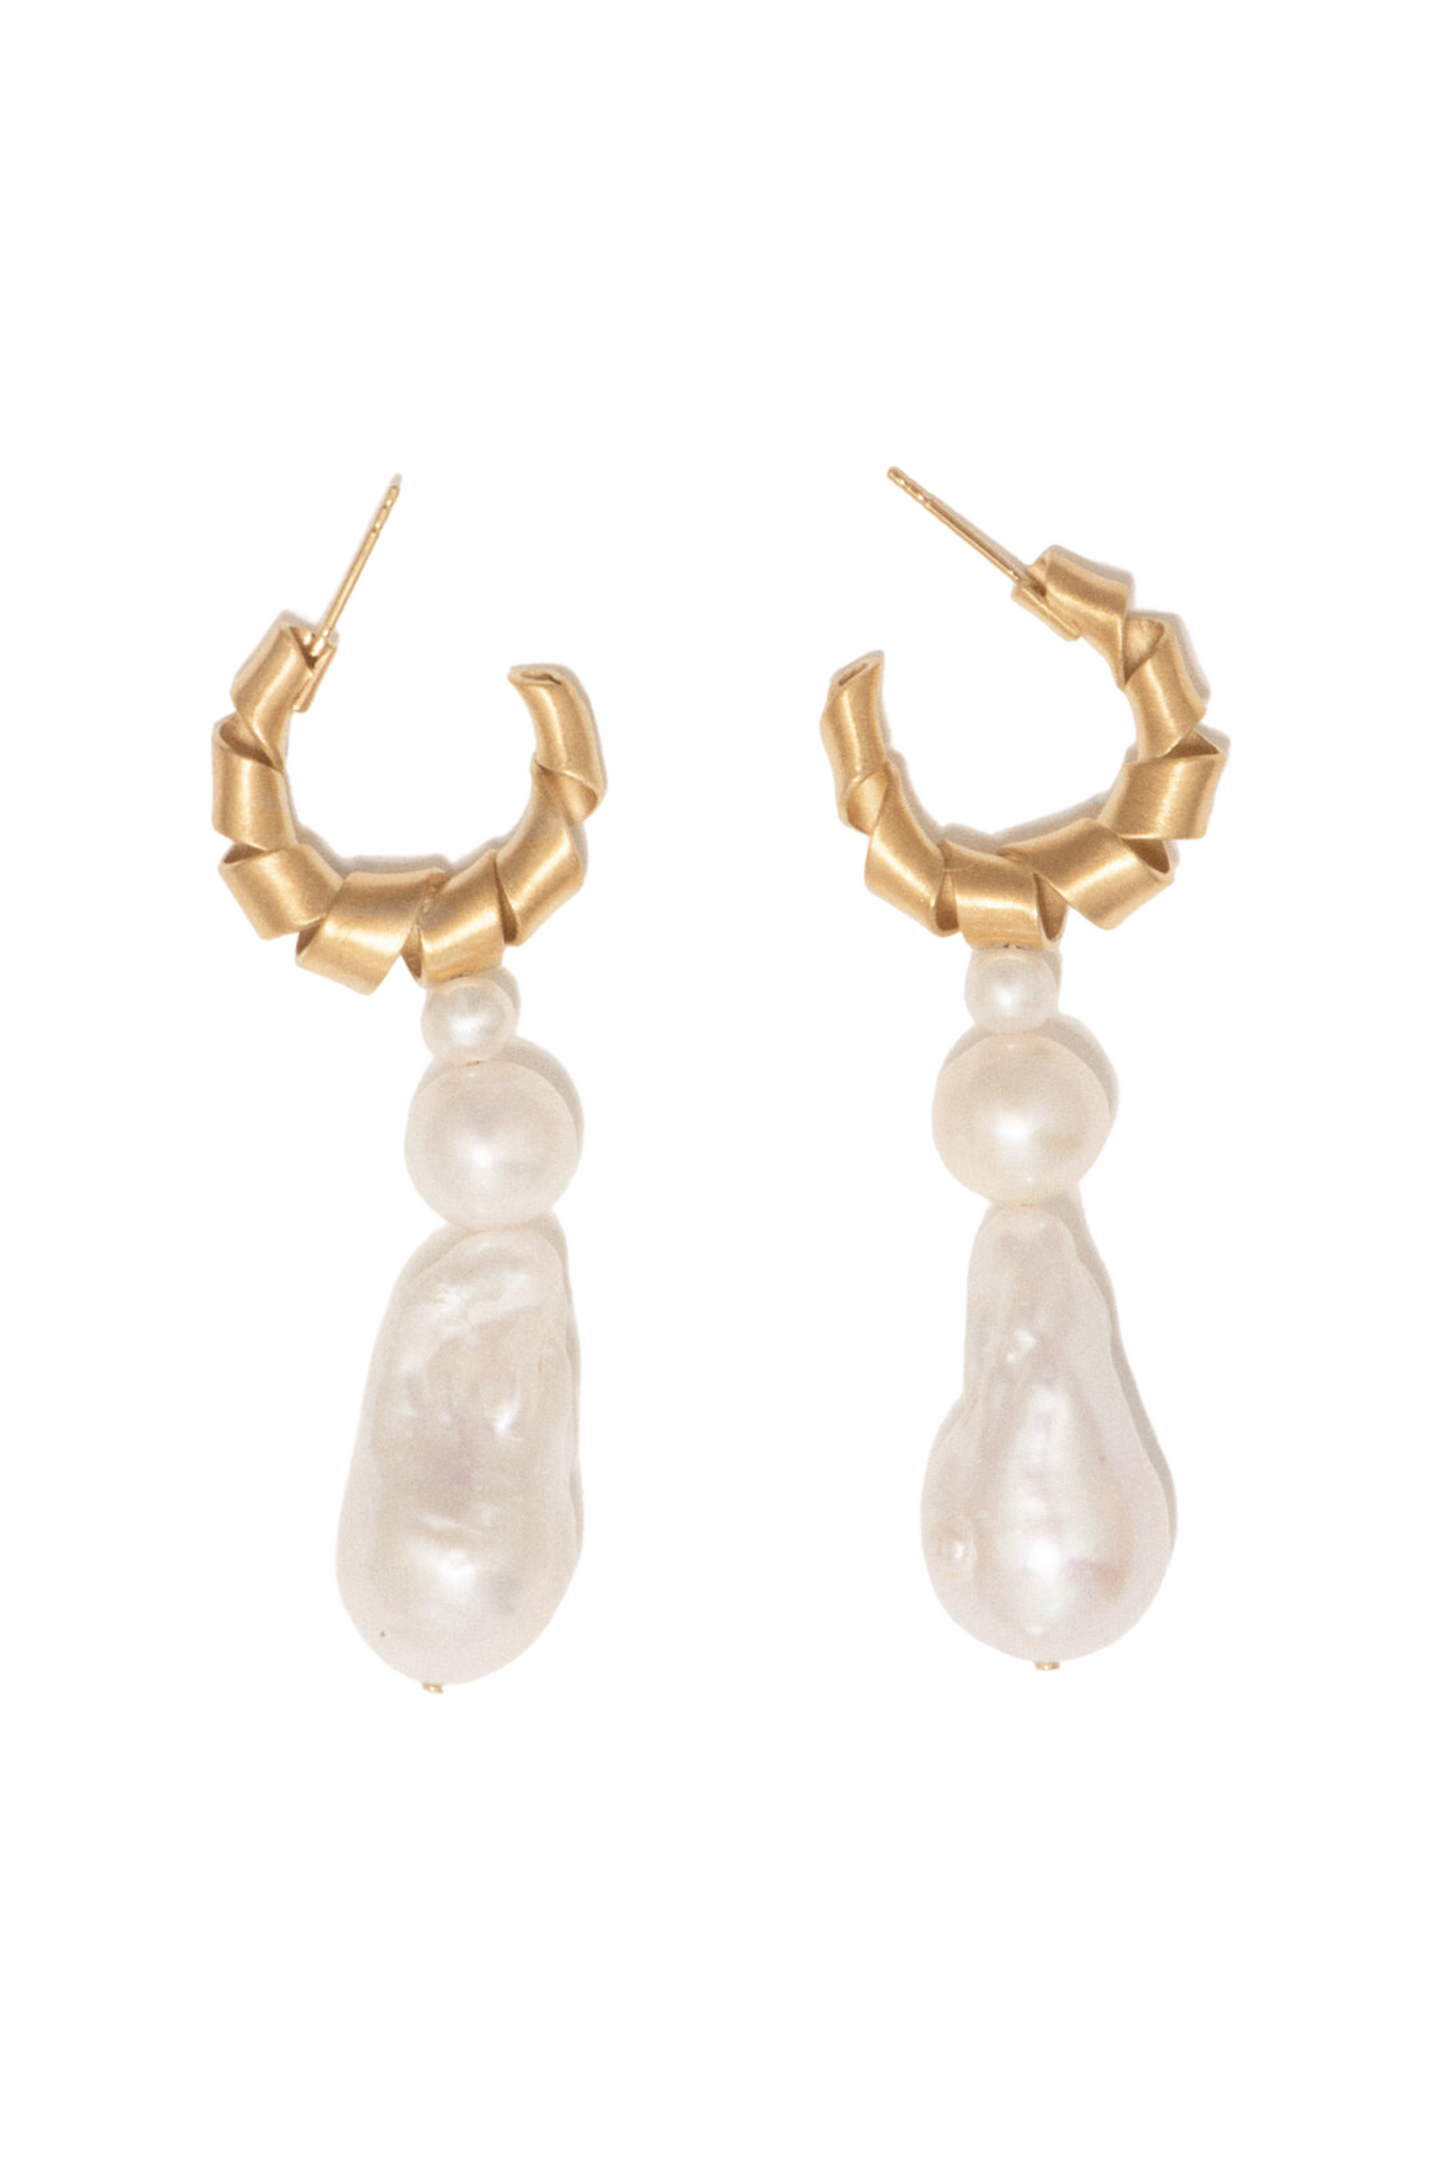 COMPLETED WORKS // GOLD VERMEIL AND PEARL EARRINGS